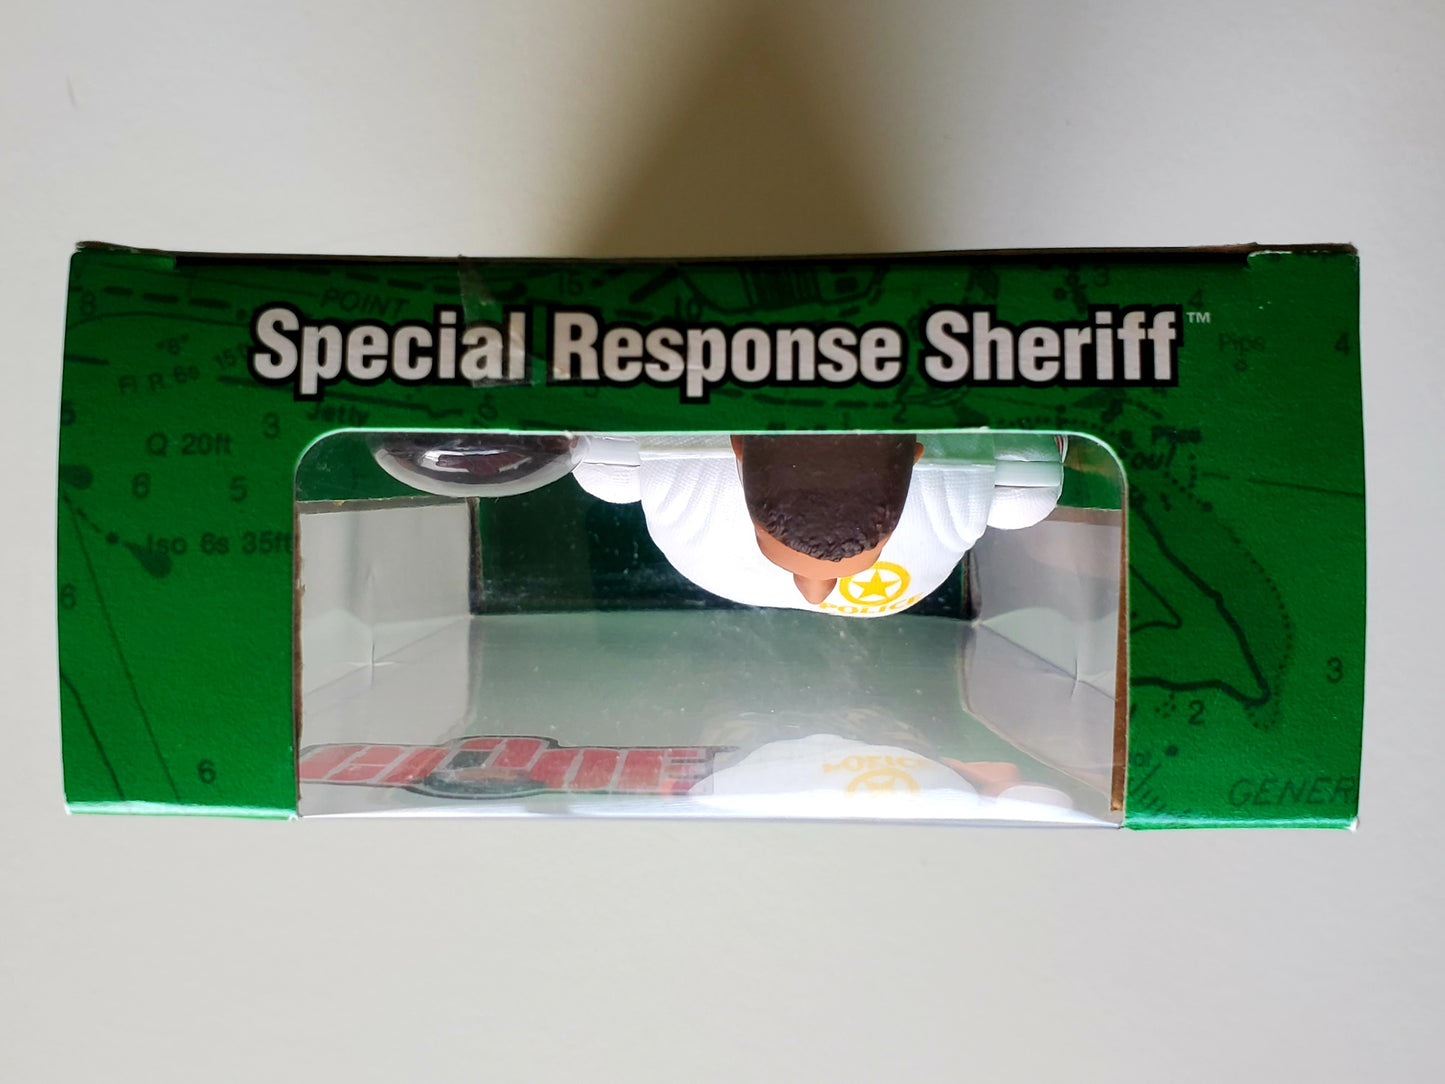 G.I. Joe Special Response Sheriff 12-Inch Action Figure